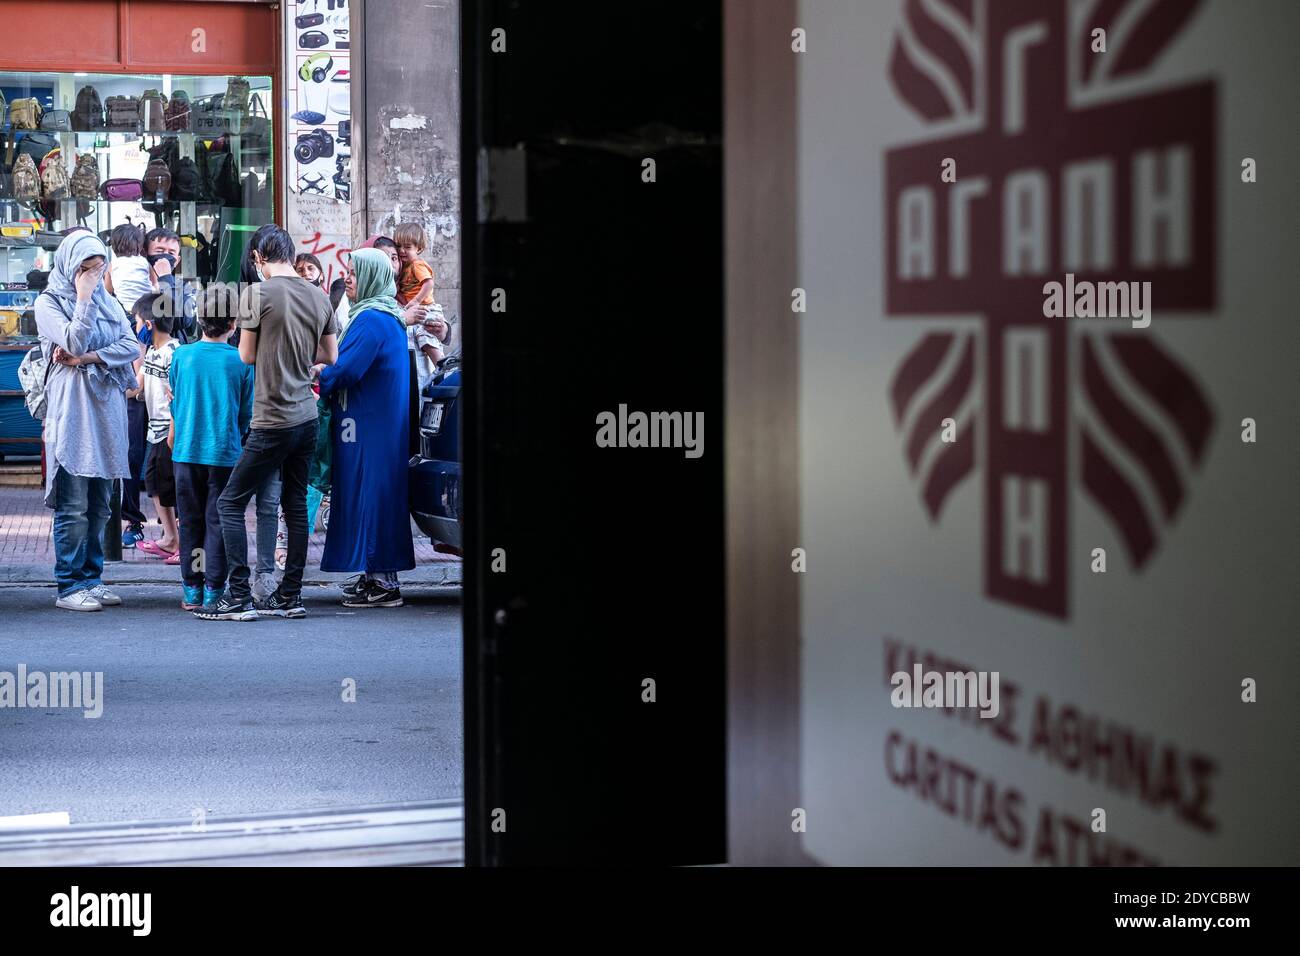 The economic crisis in Athen is mixed with the discomfort of refugees, waiting to receive basic necessities in front of the Caritas center. Stock Photo